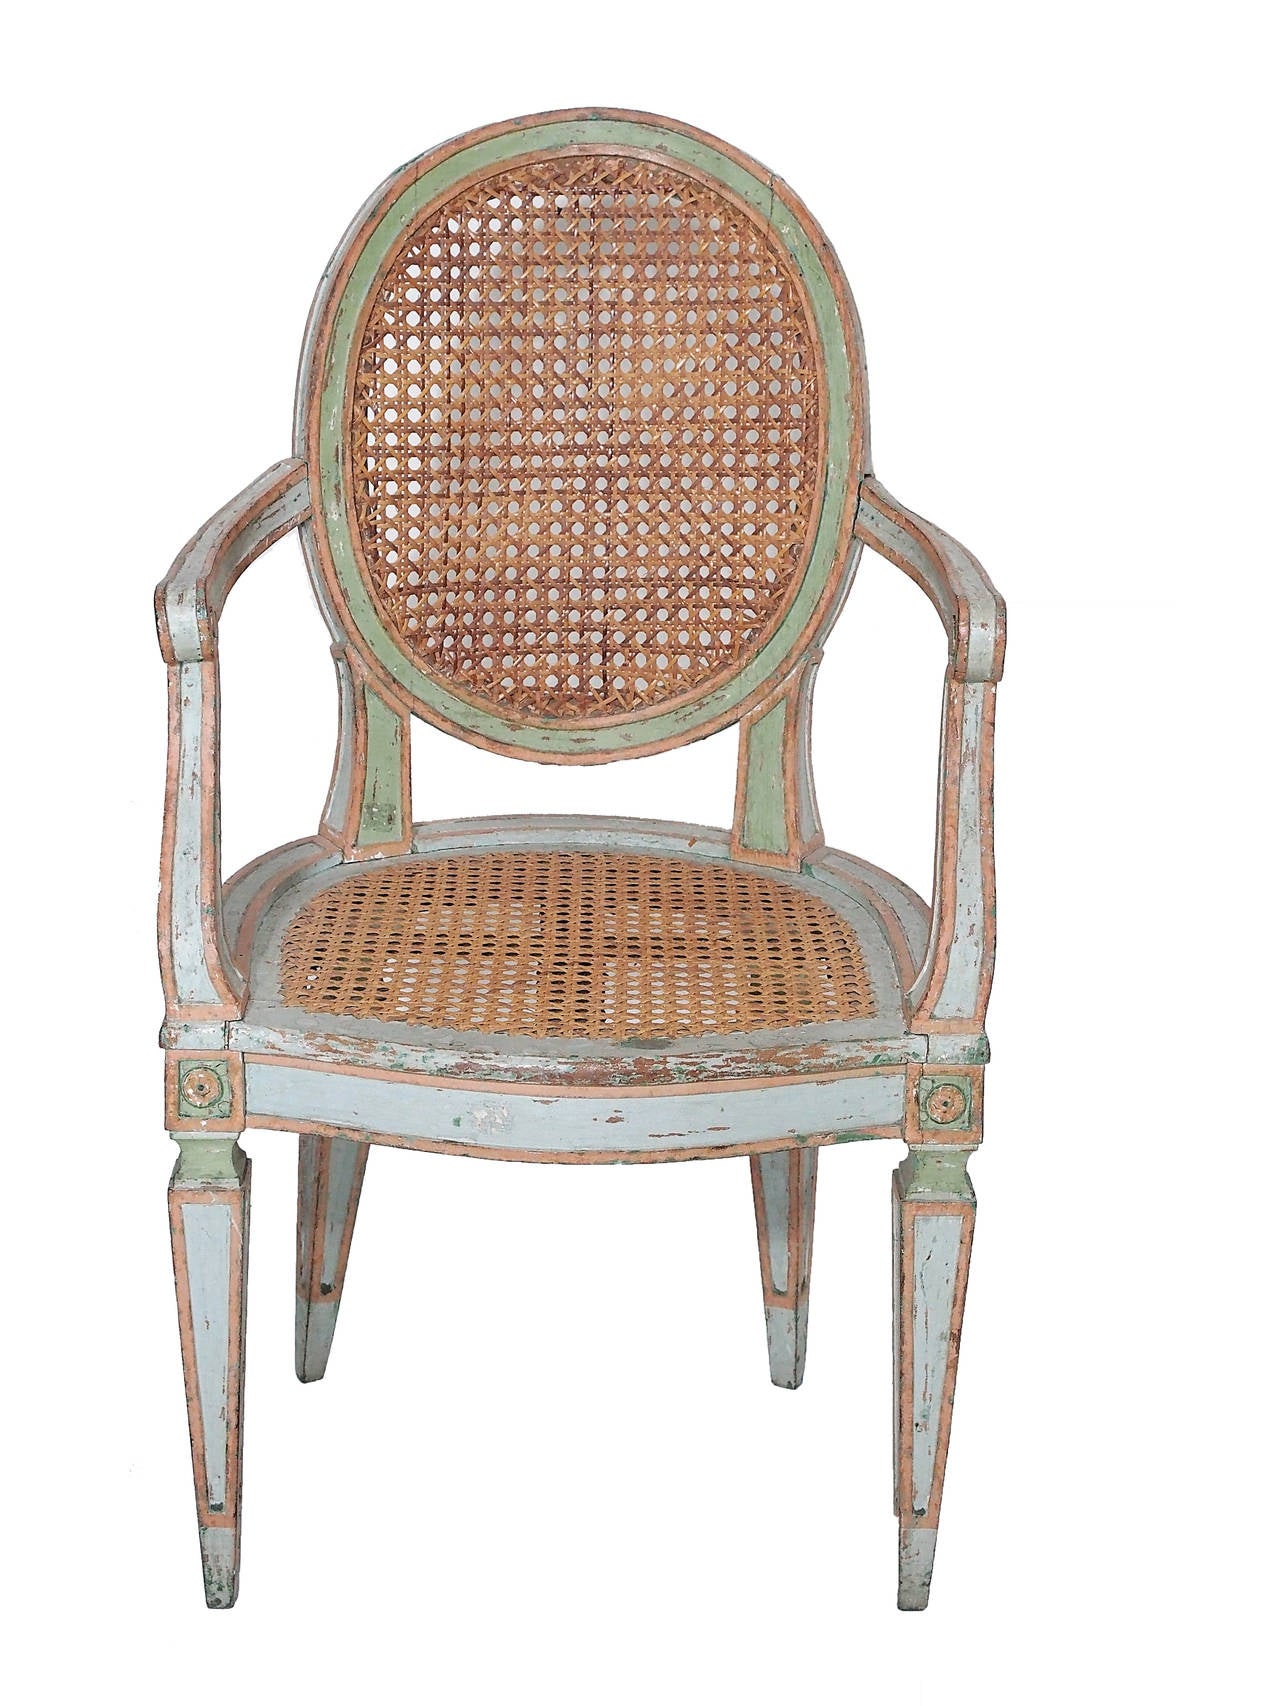 These antique caned Tuscan armchairs are beautifully proportioned with lovely painted finish and caned back and seats. These antique Louis XVI style Italian caned armchairschairs are a terrific addition as host chairs to a dining table or sitting